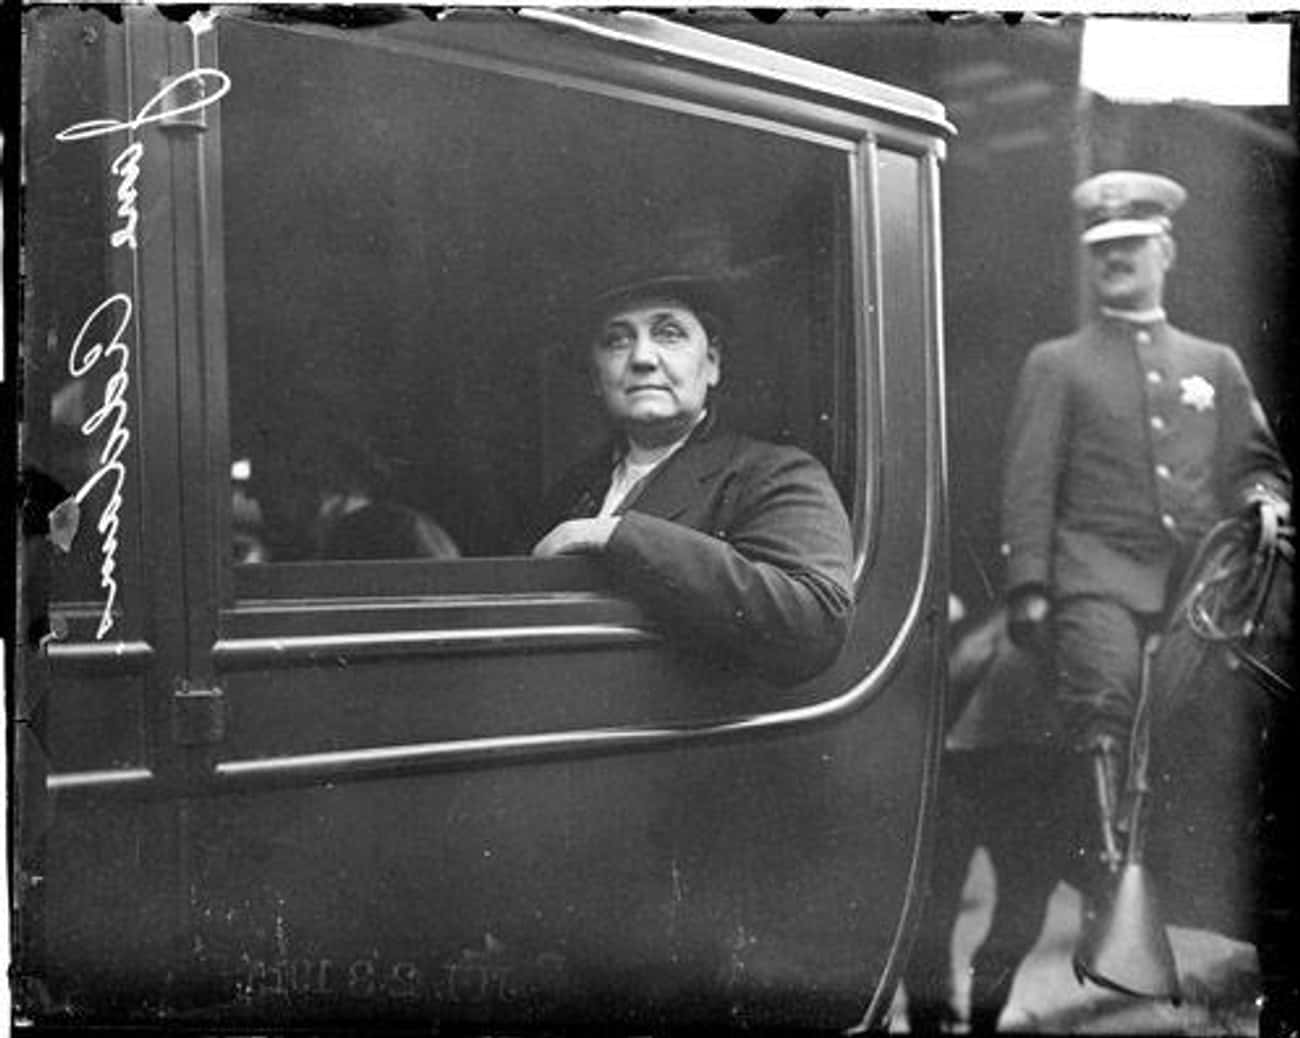 Jane Addams, Community Activist And Mother Of The 'Devil Baby'